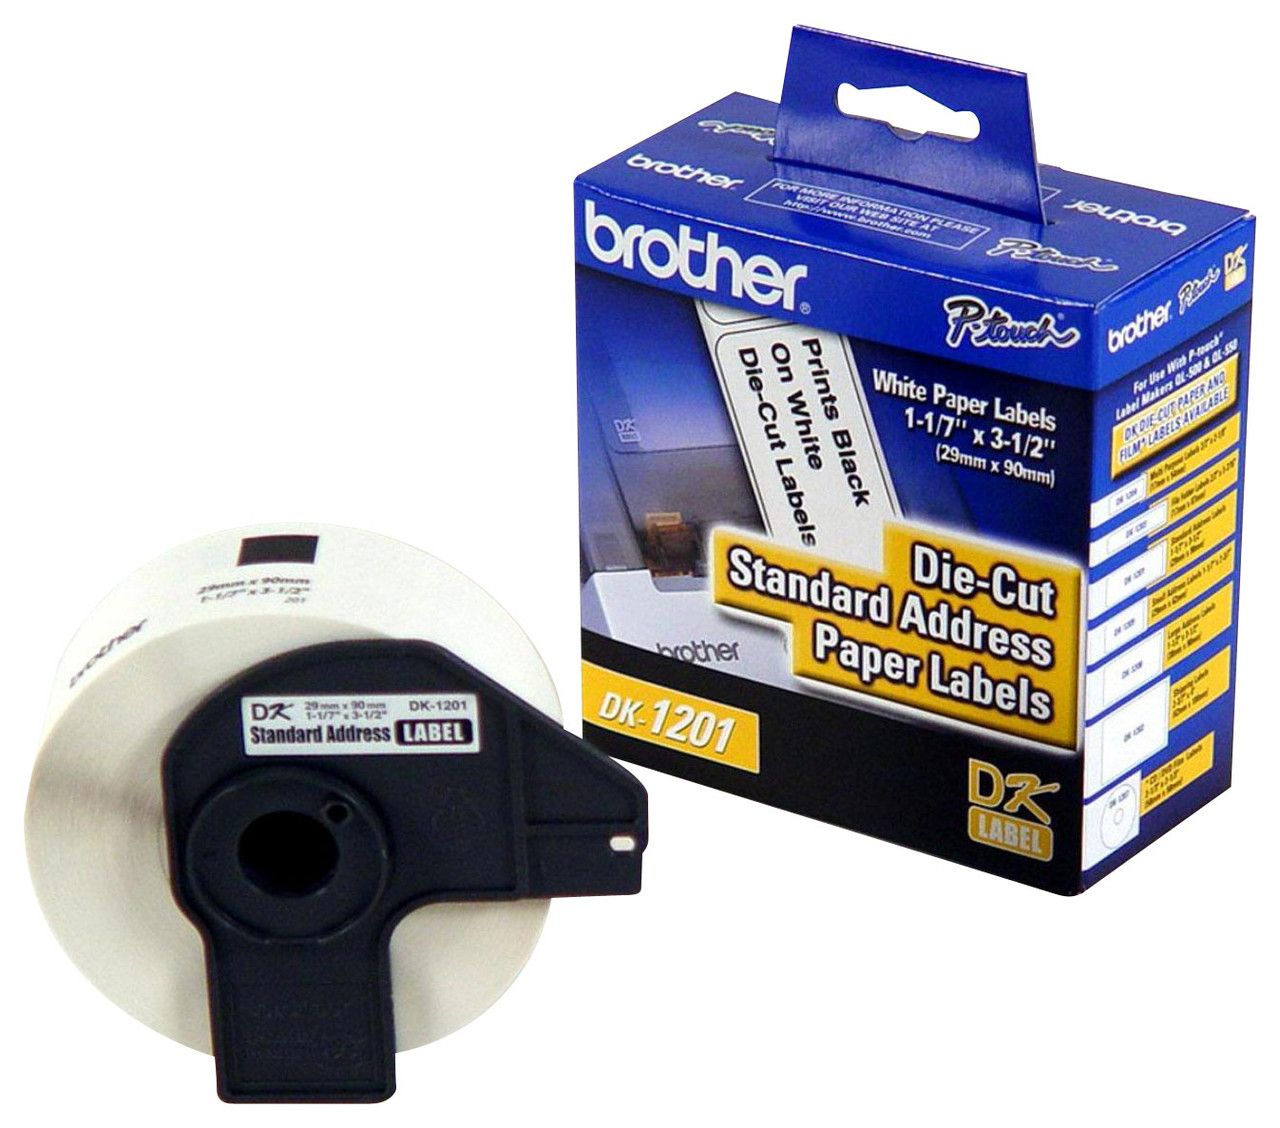 Brother - 1-1/7" x 3-1/2" Address Paper Labels (400-Pack) - White